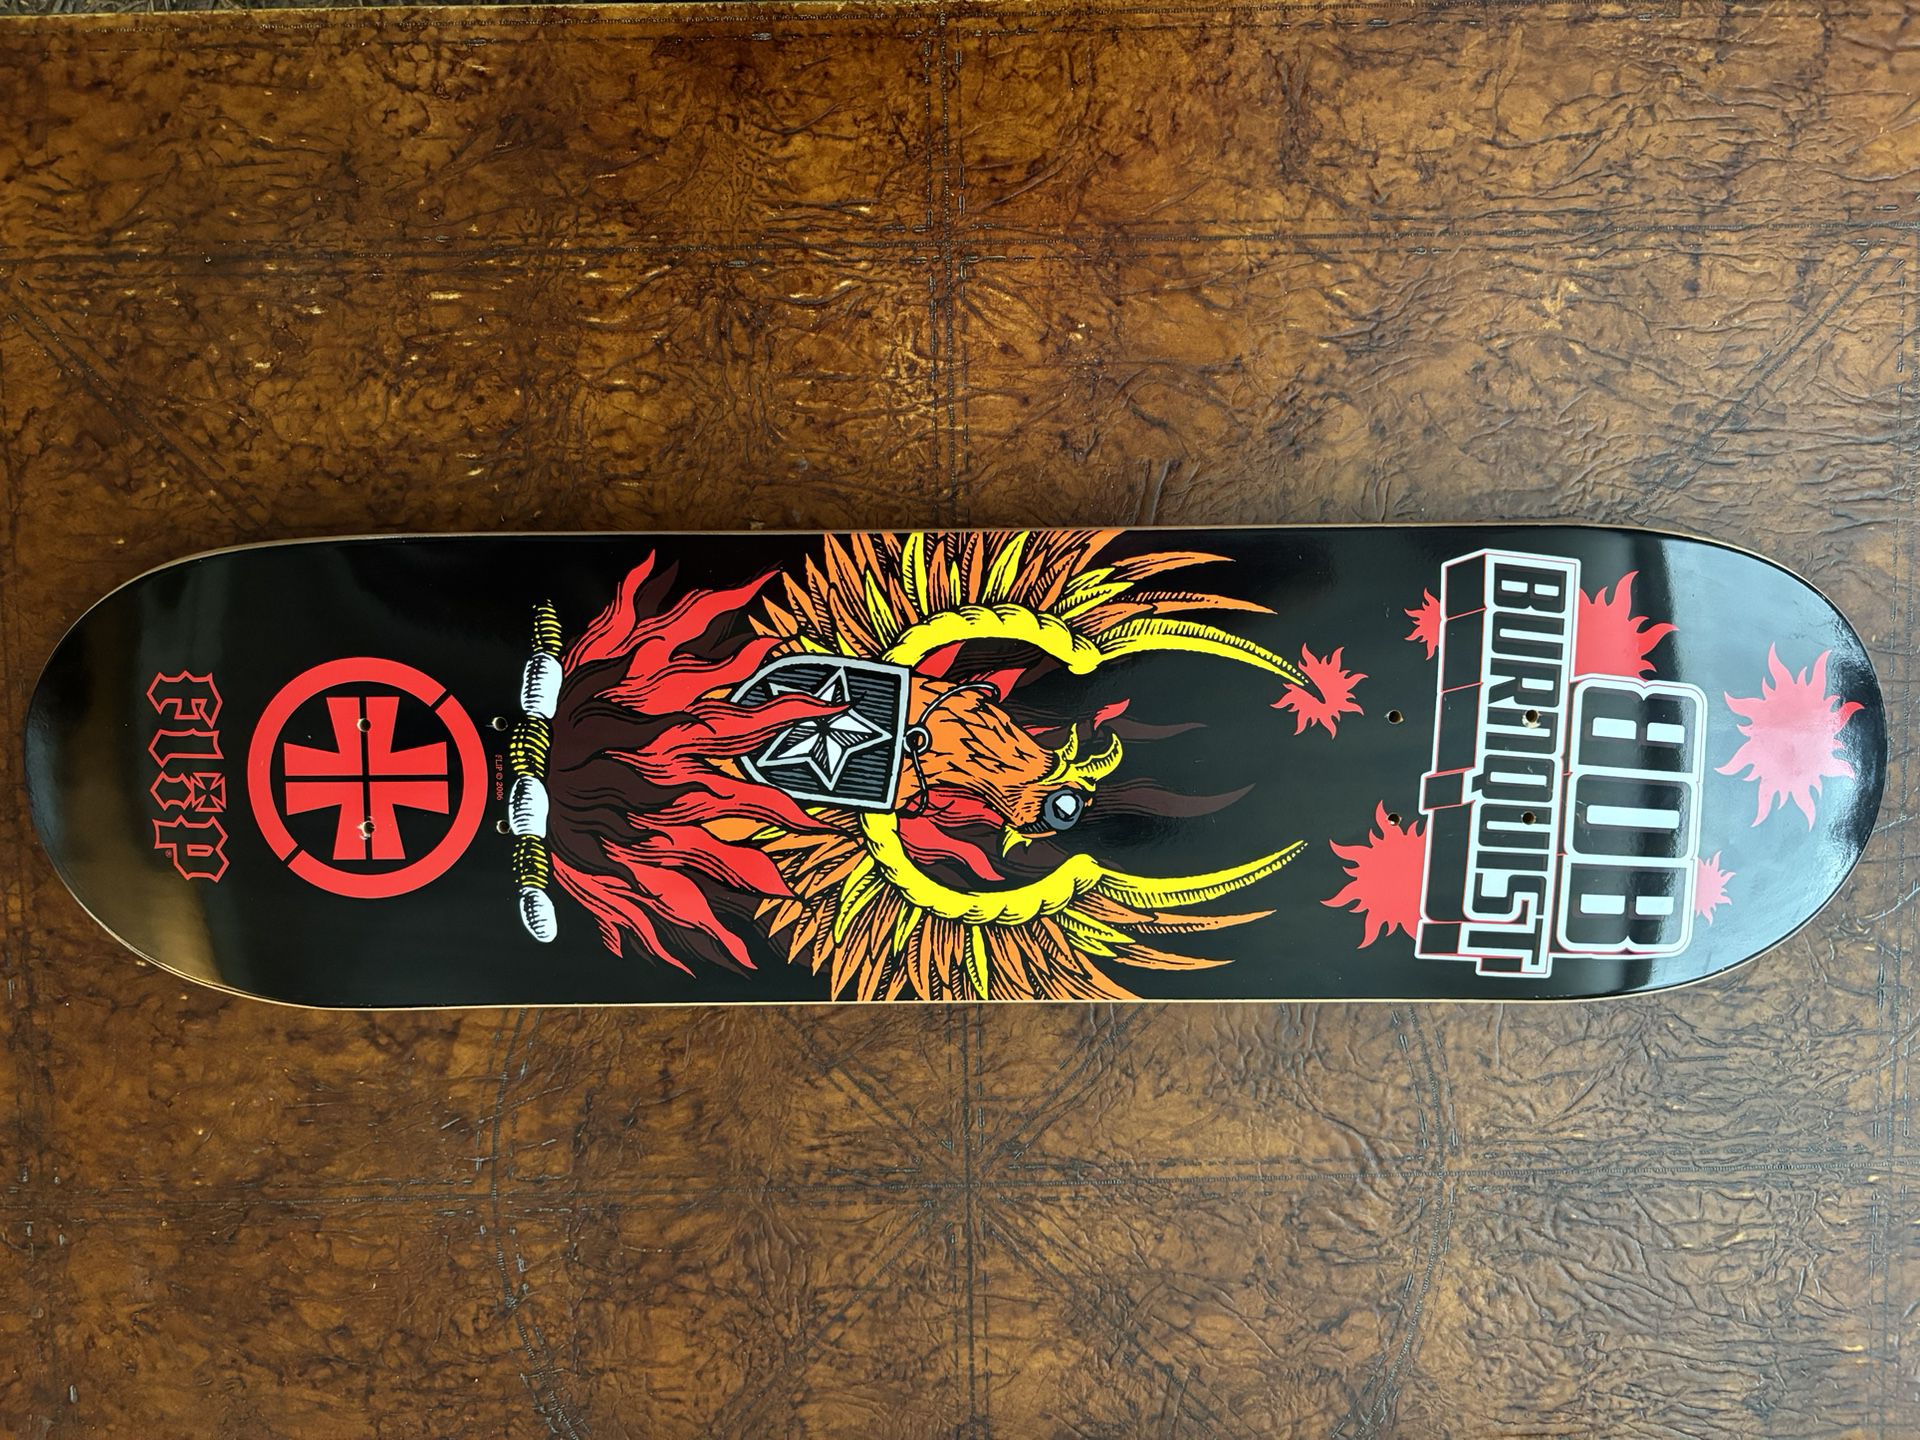 EXTREMELY RARE NEVER BEEN USED BOB BURNQUIST SKATEBOARD DECK